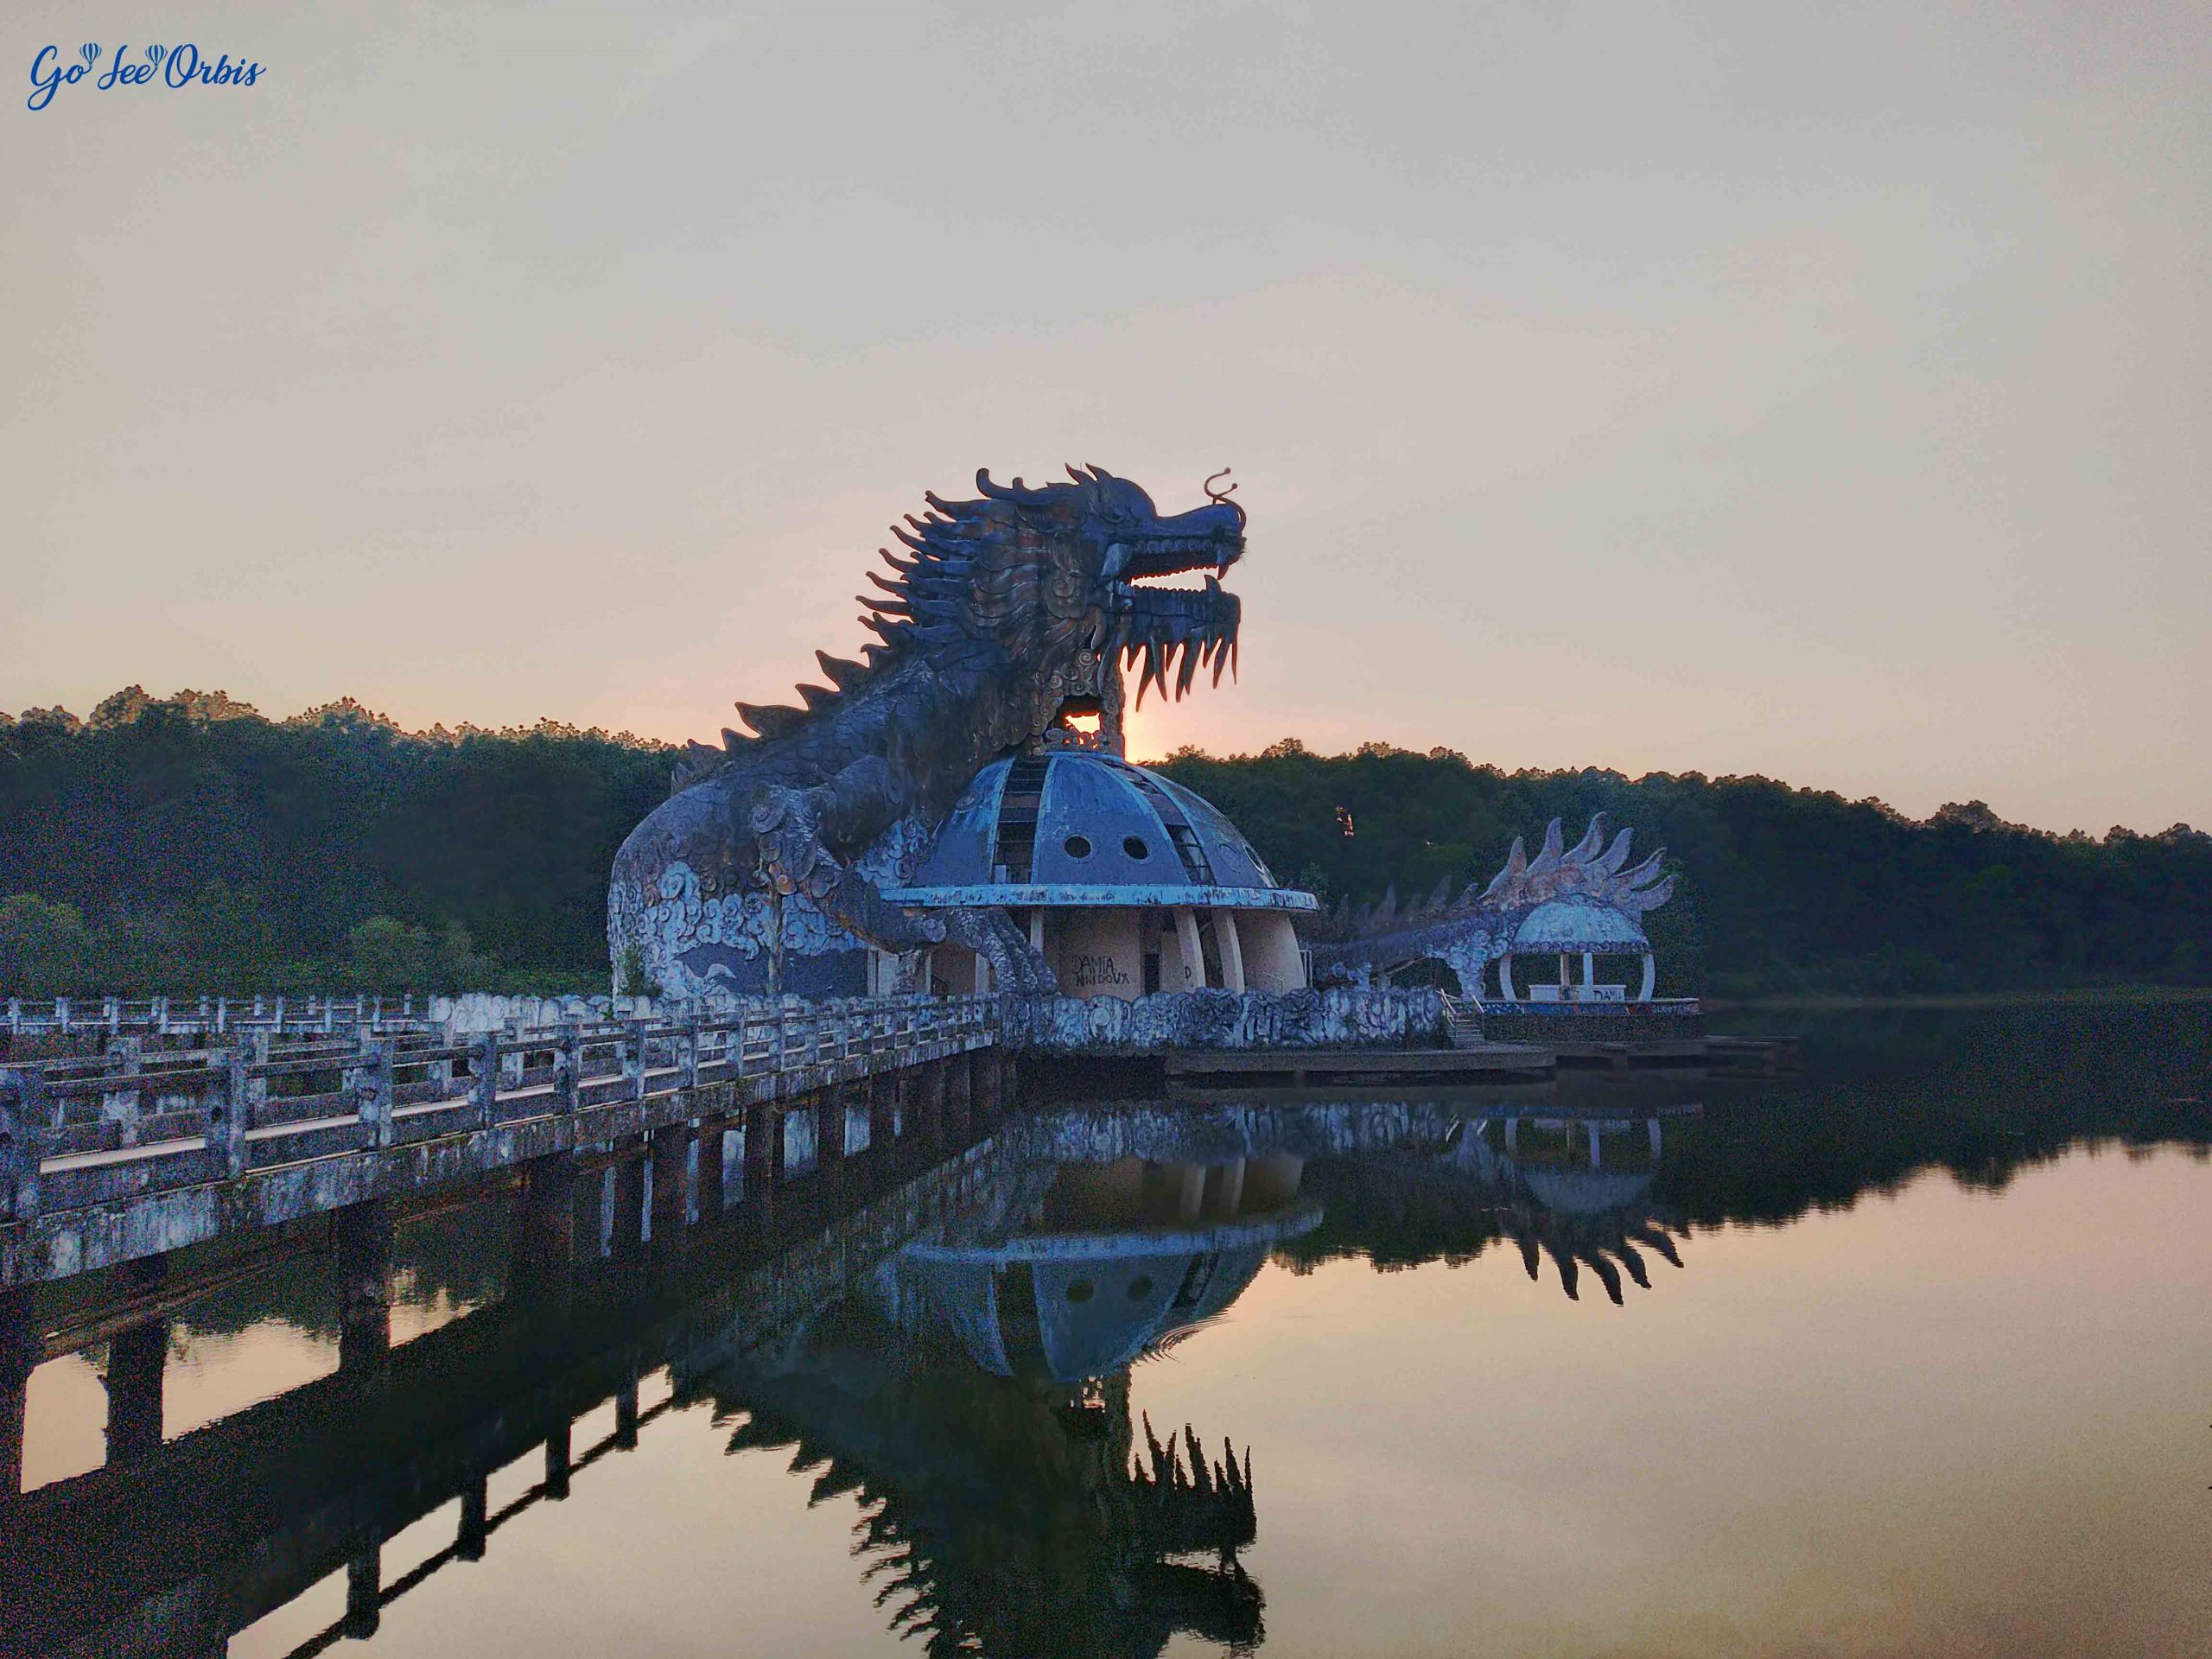 https://goseeorbis.com/wp-content/uploads/2020/11/Dragon-at-the-Thuy-Tien-lake-Abandoned-Water-Park-in-Hue-Vietnam-scaled.jpg